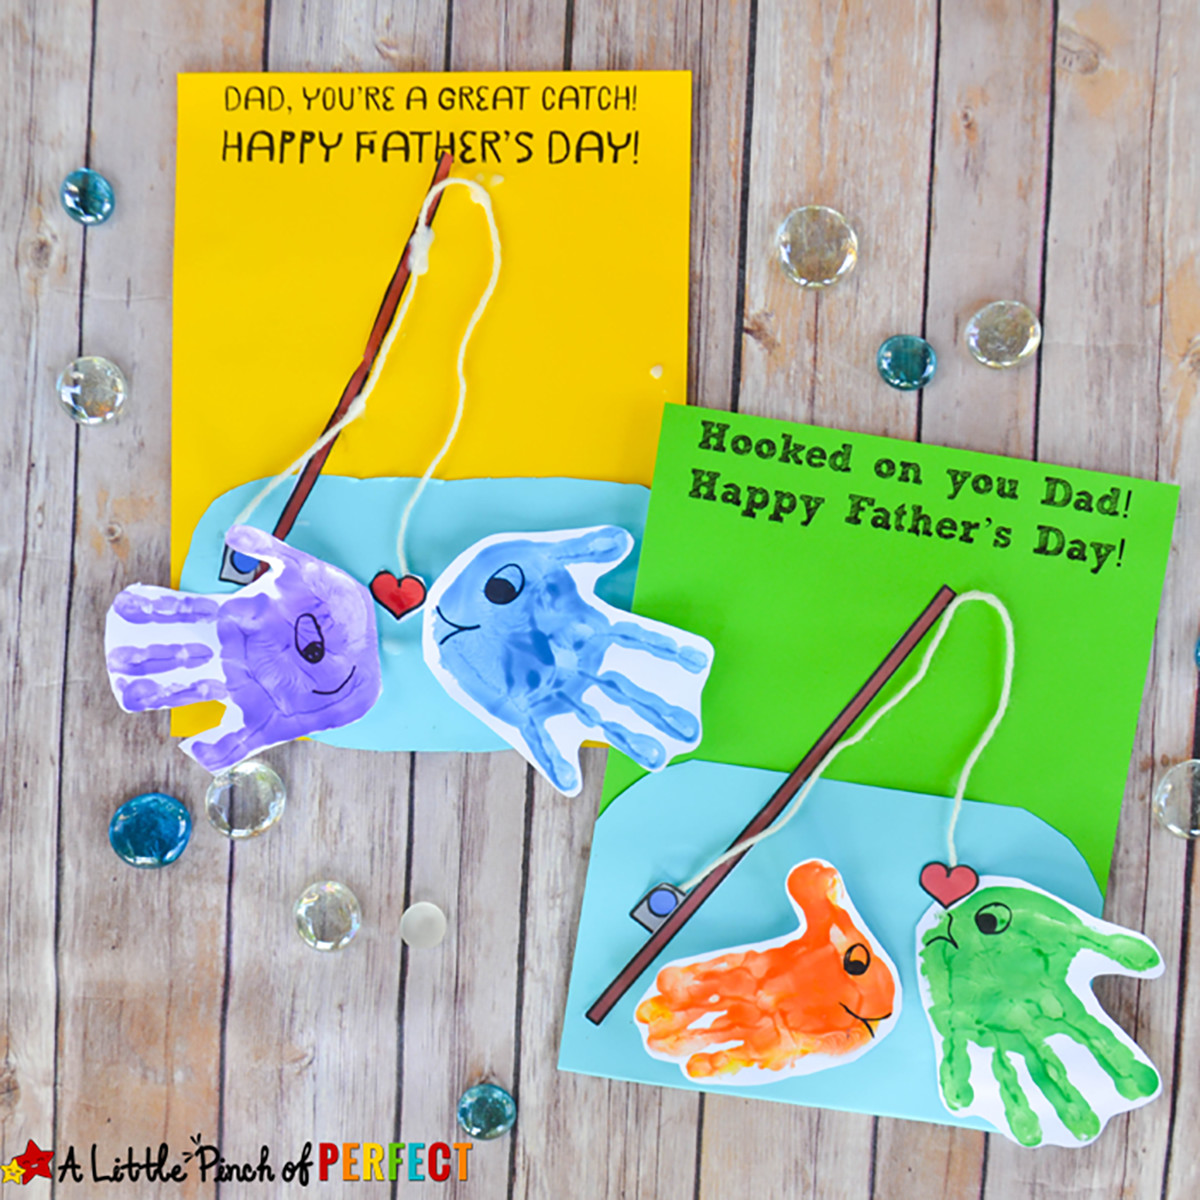 Preschool Fathers Day Crafts Ideas
 DIY Preschool Father s Day Gifts Your Little es Will